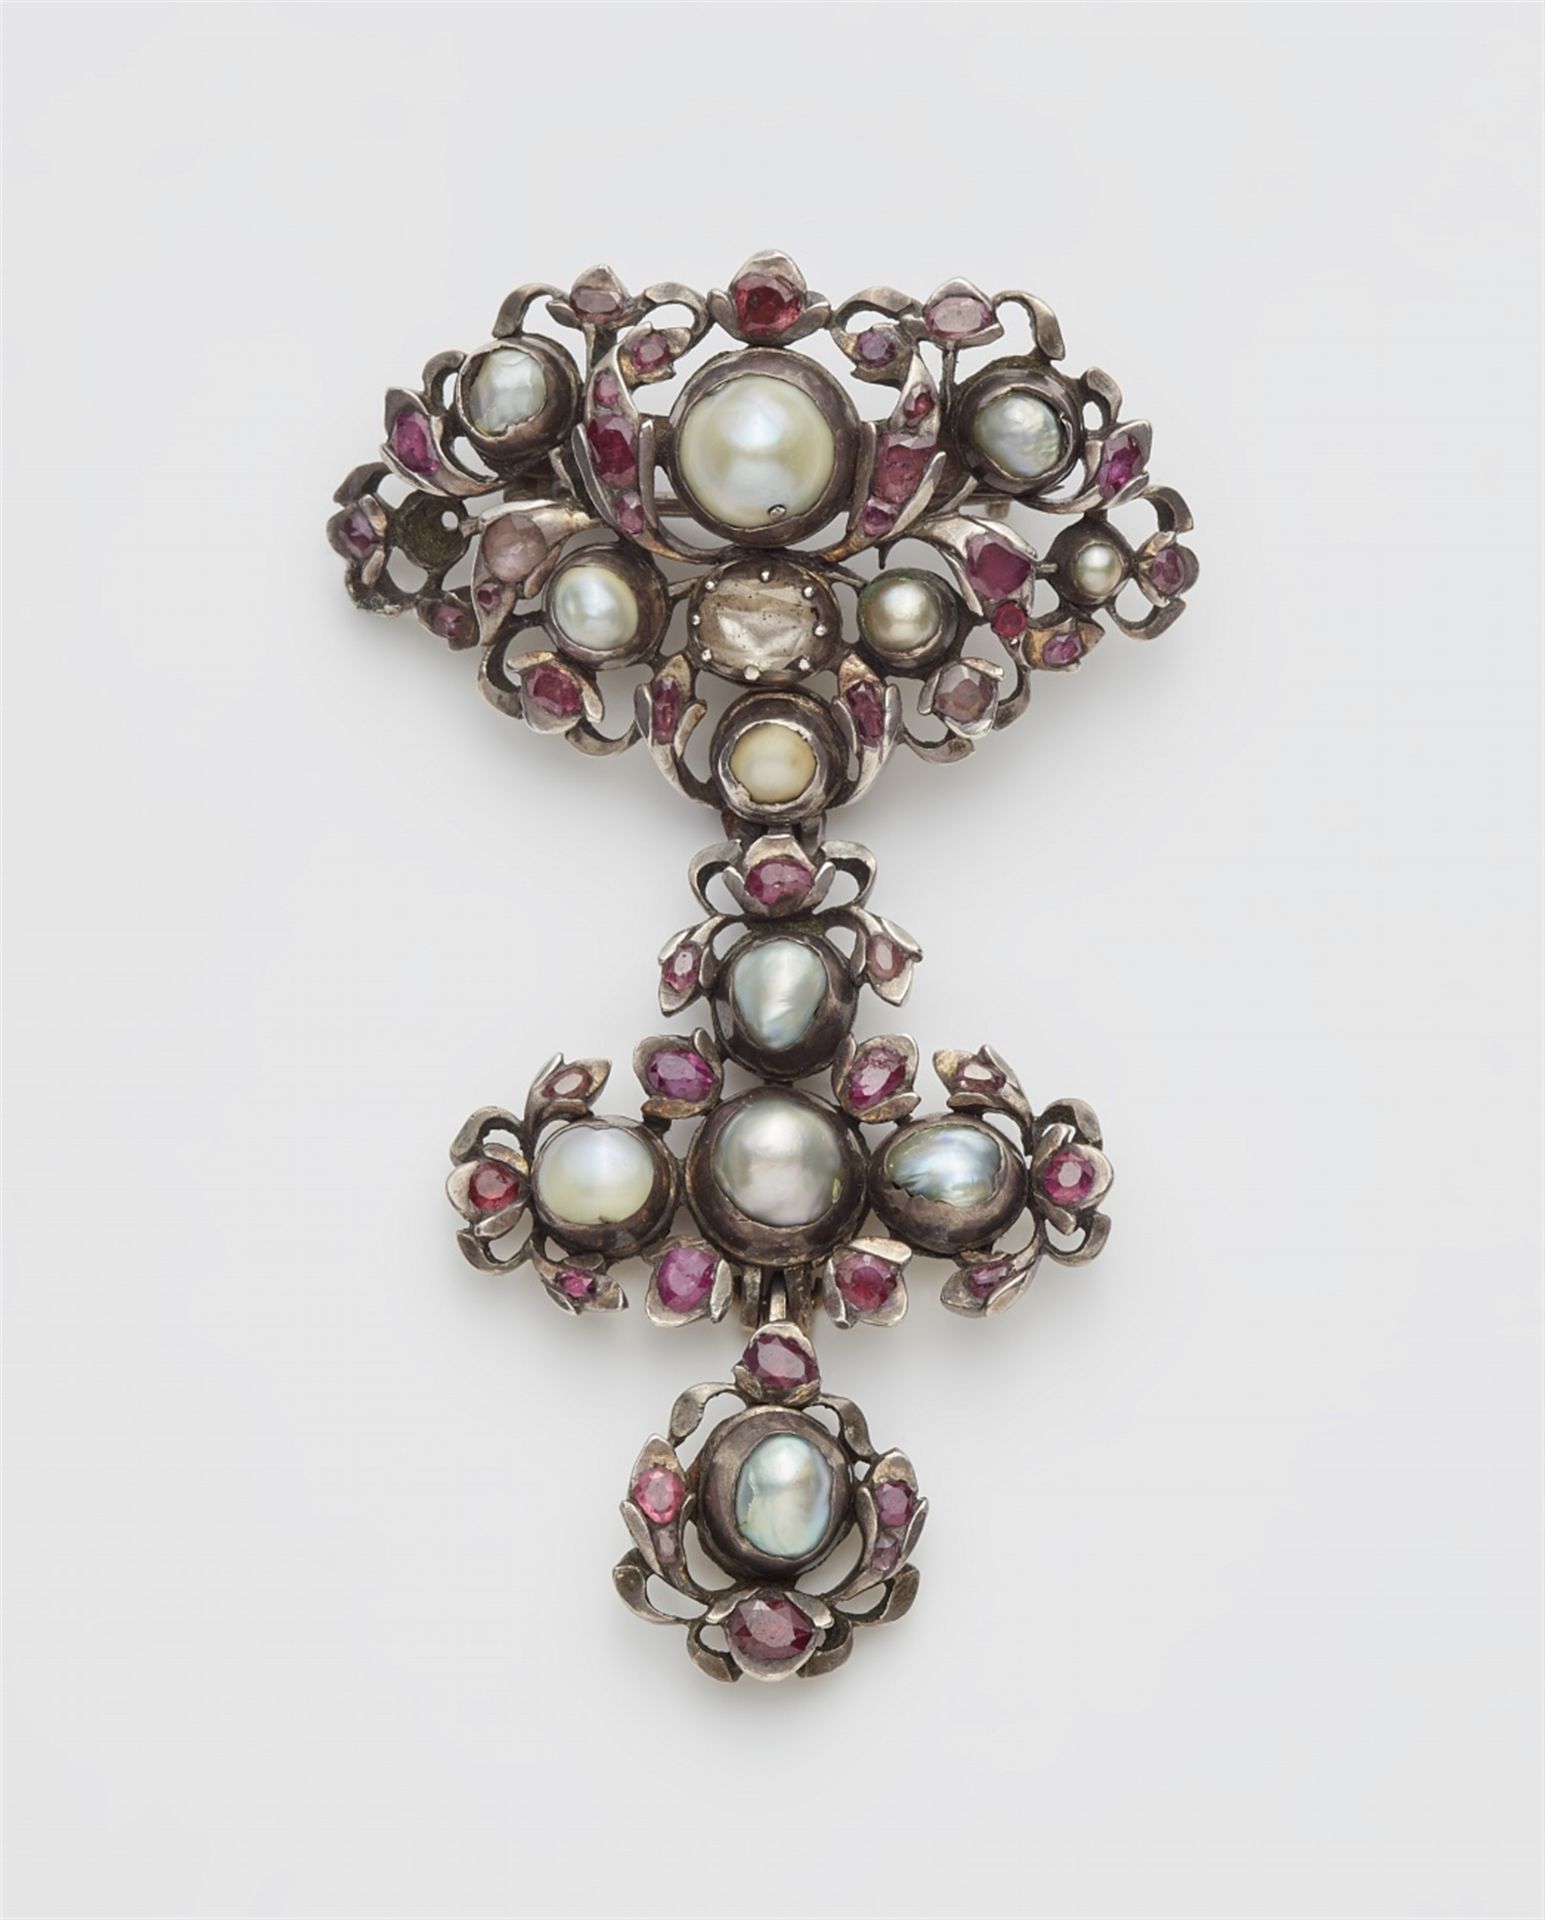 A Baroque brooch with a cross pendant